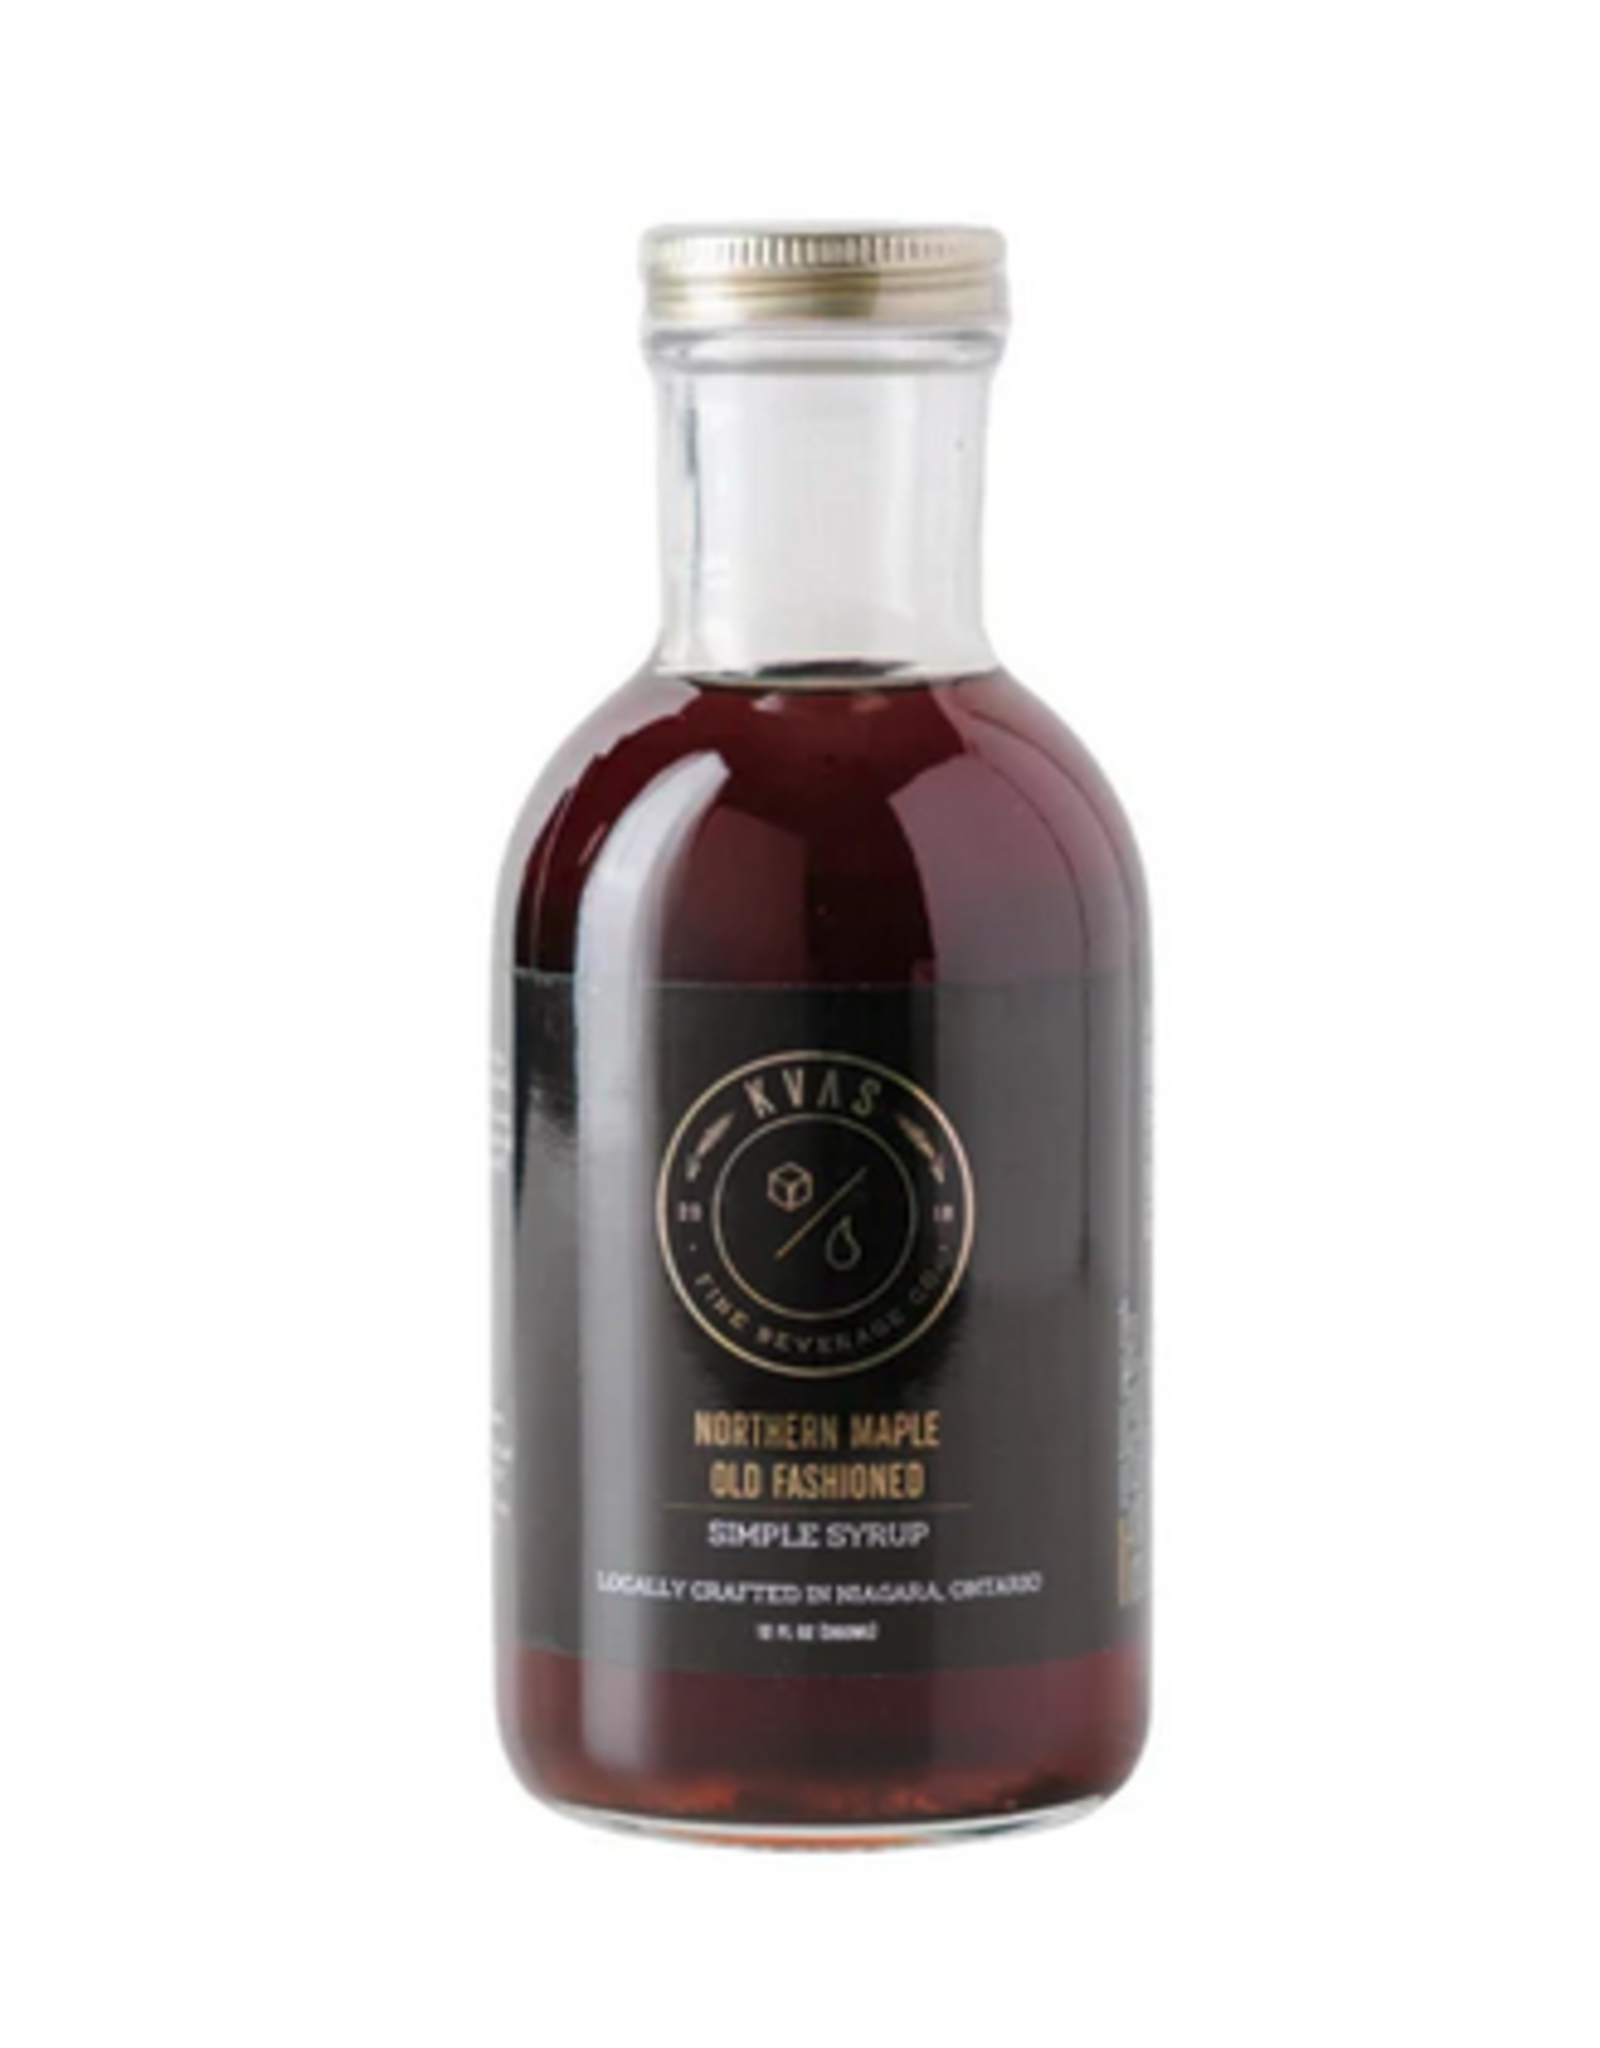 KVAS Northern Old Fashioned Maple Syrup